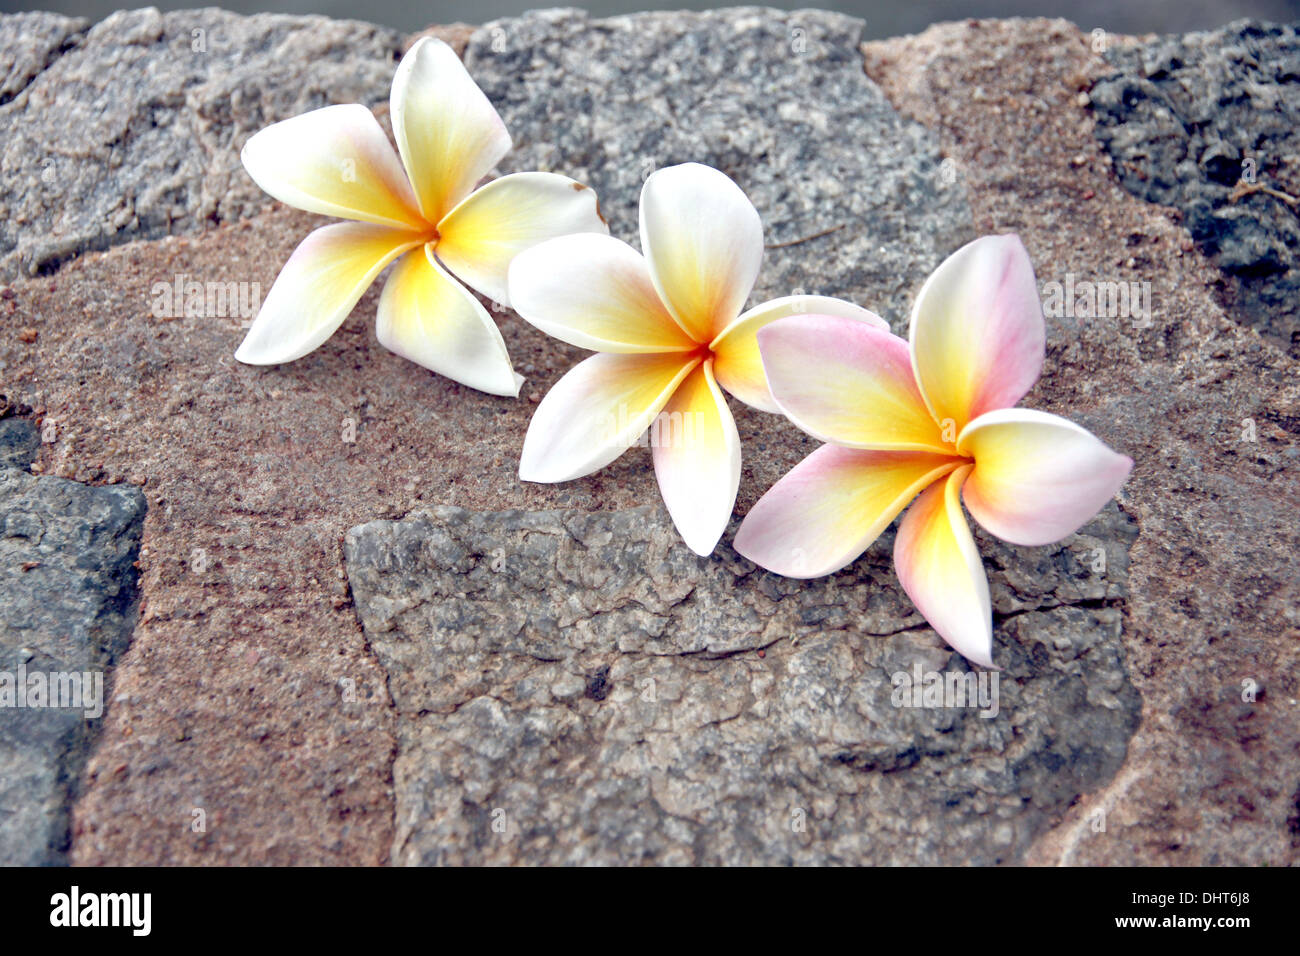 The Picture focus Frangipani flowers are yellowish white on stone Background. Stock Photo